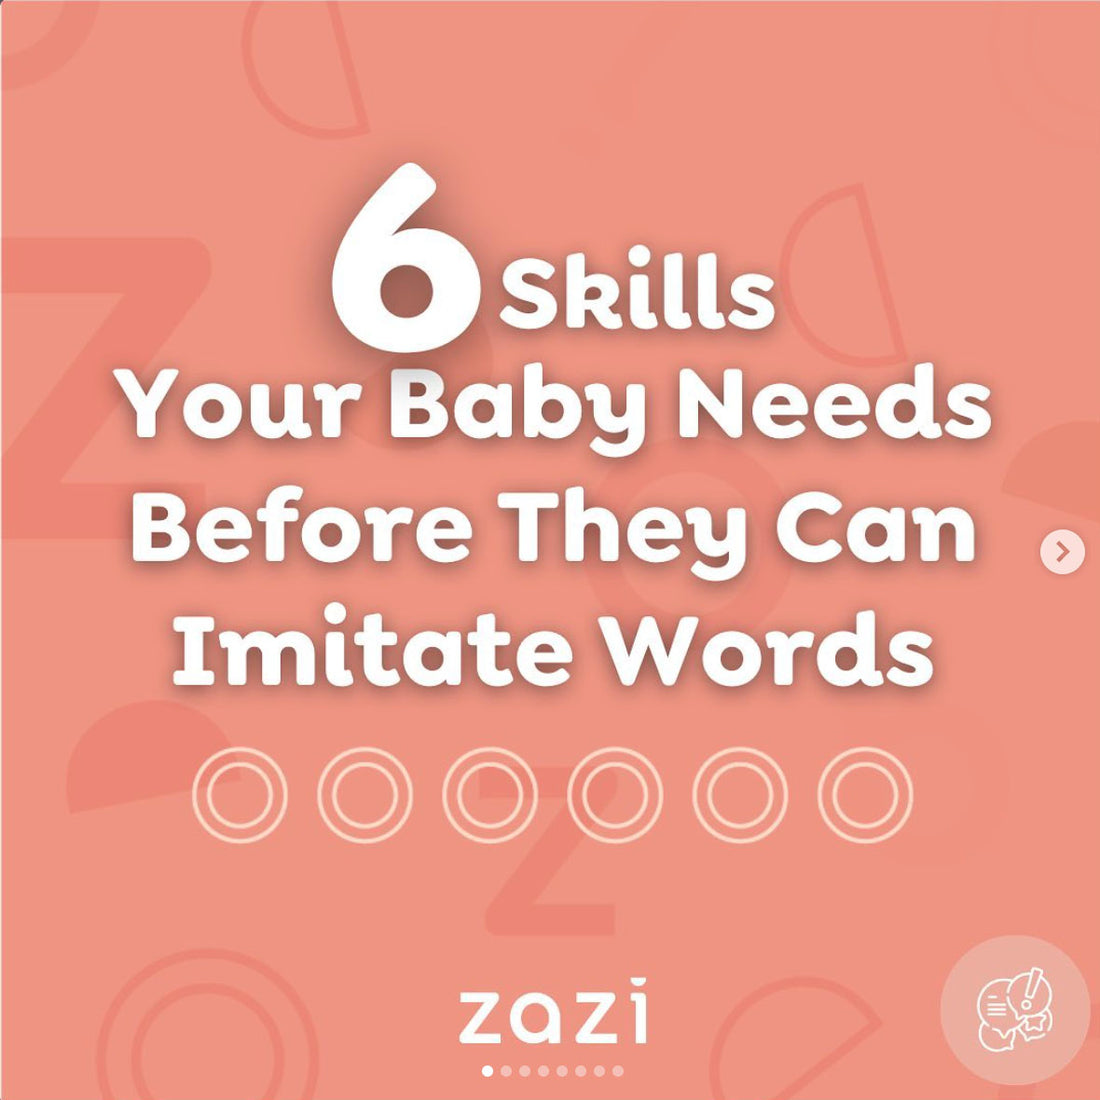 6 Skills Your Baby Needs Before They Can Imitate Words